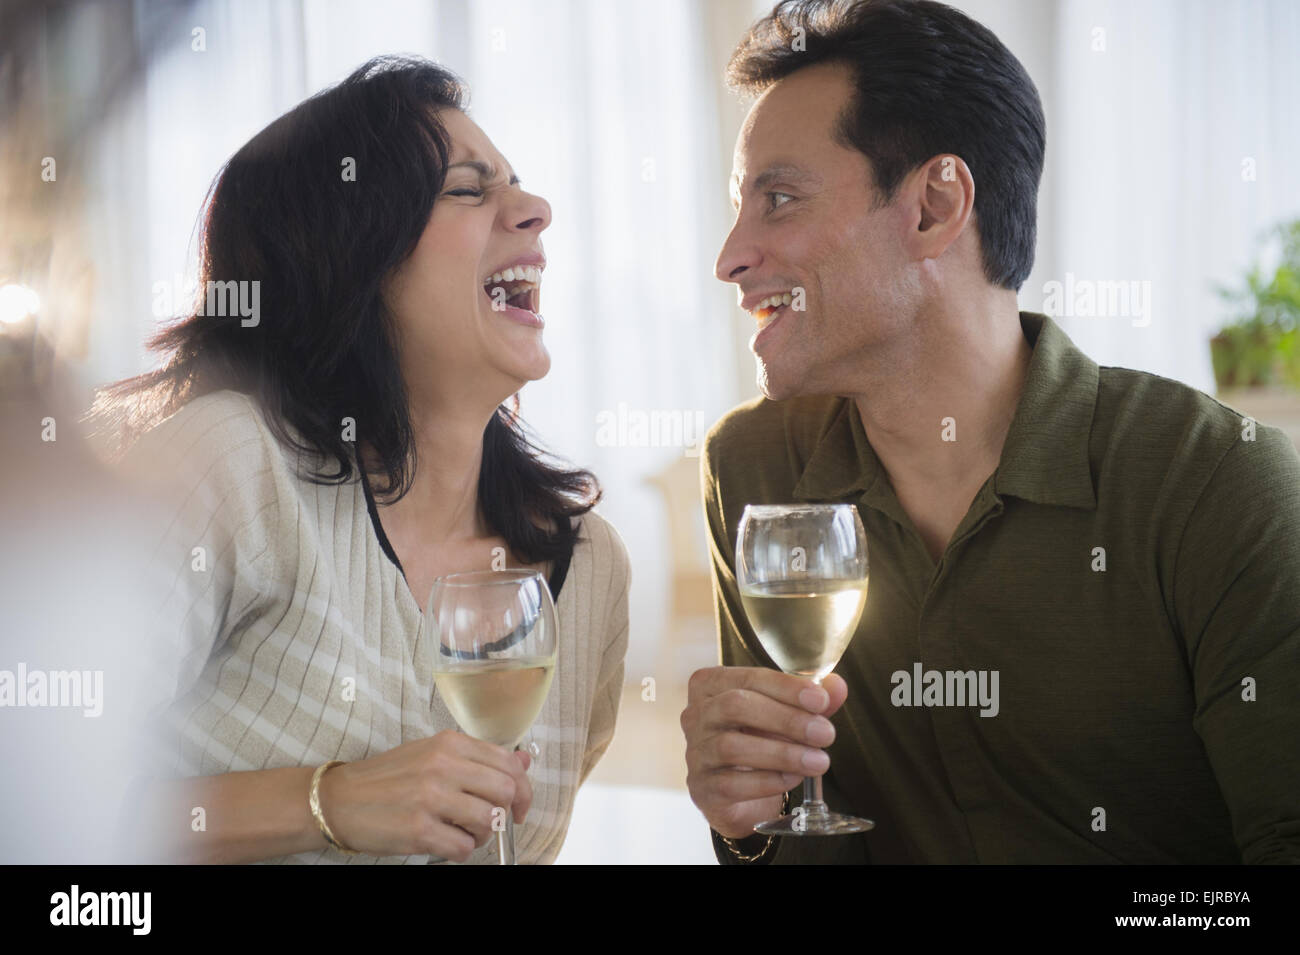 Couple laughing and drinking white wine Stock Photo